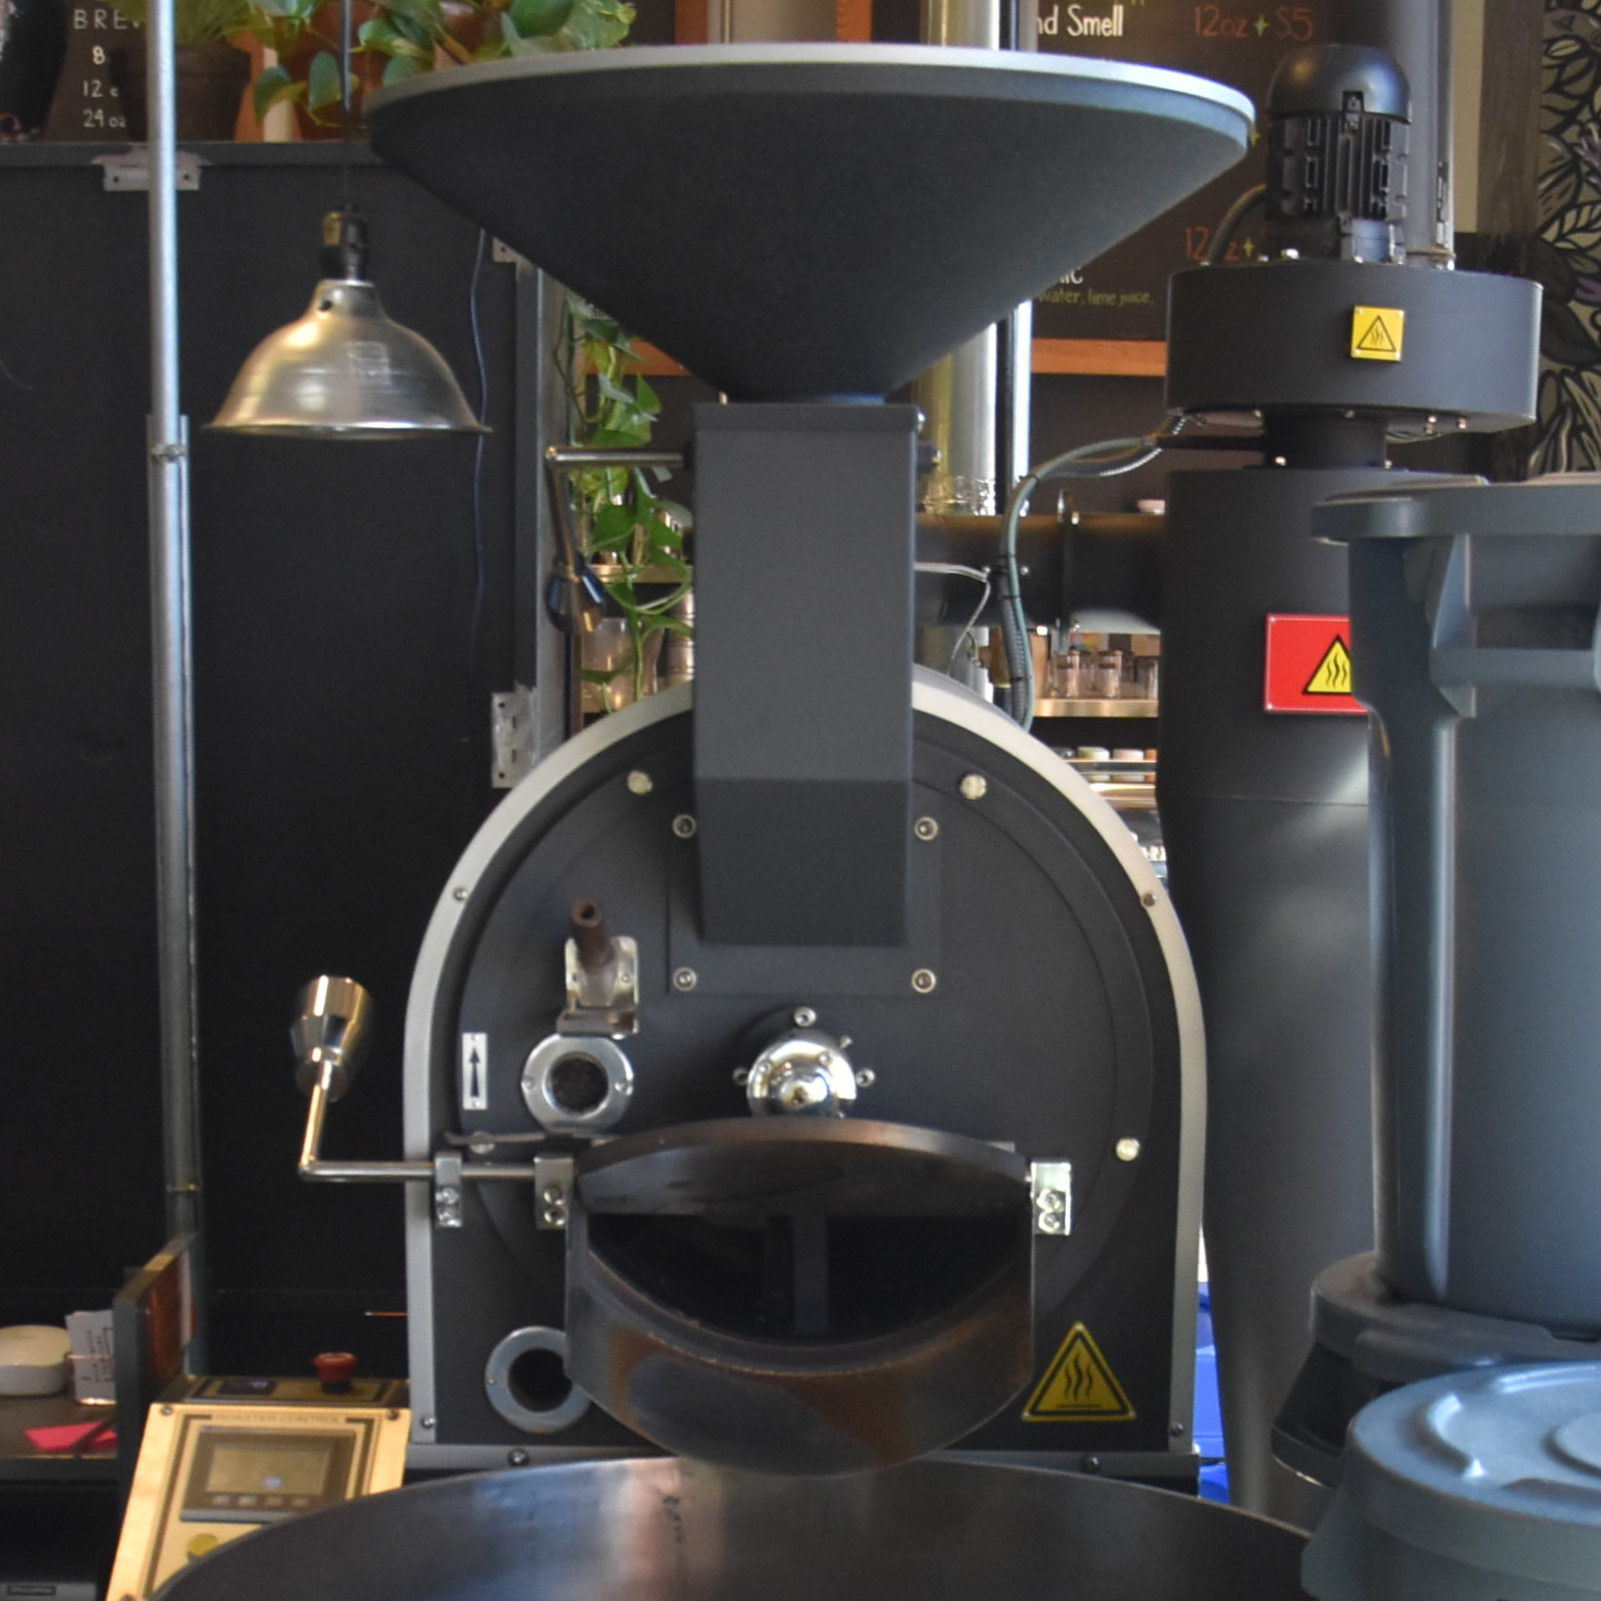 The 15 kg Joper roaster from Velo Coffee Roasters, where the roastery is inside the coffee shop on Main Street in Chattanooga.